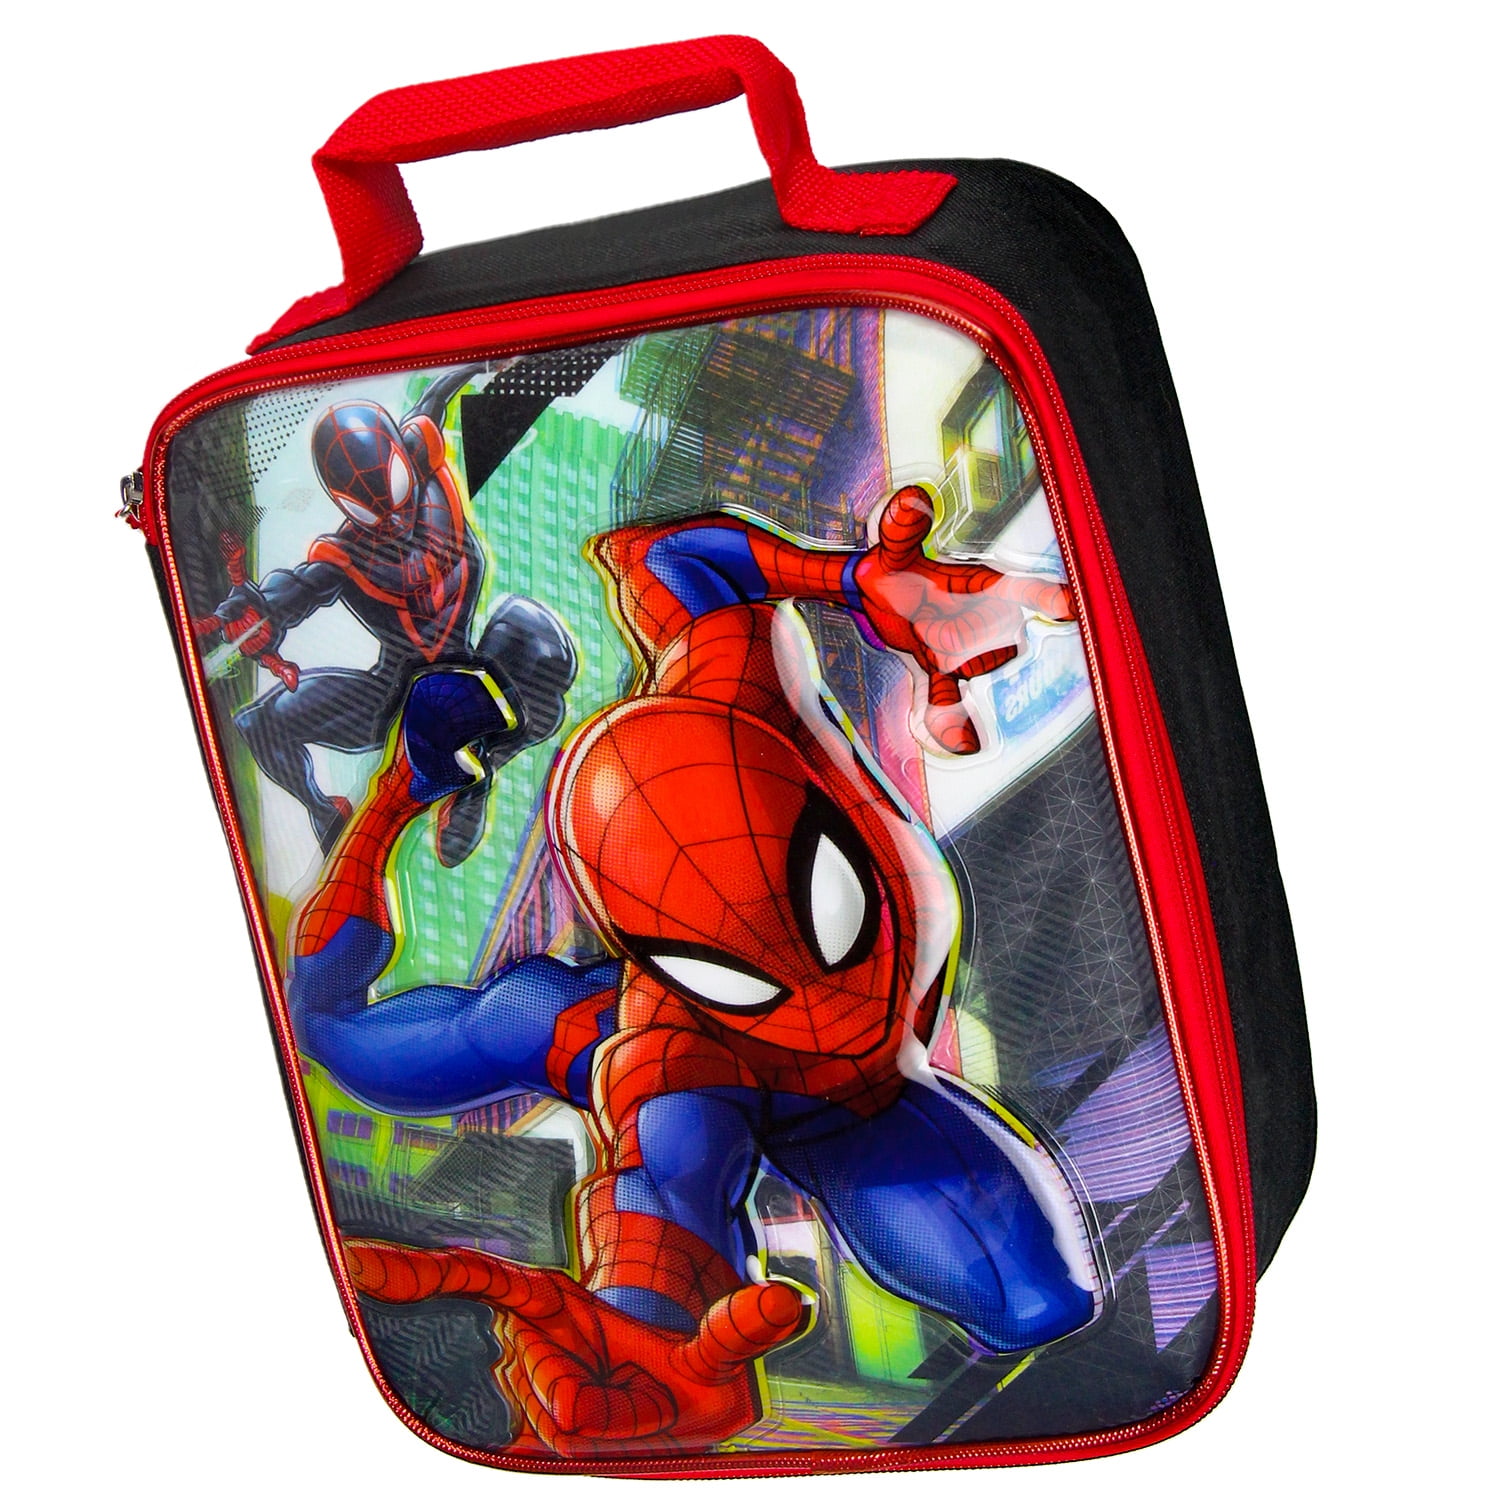 Trendy Bento/Lunch box cake, super heroes cake for kids, spiderman cake